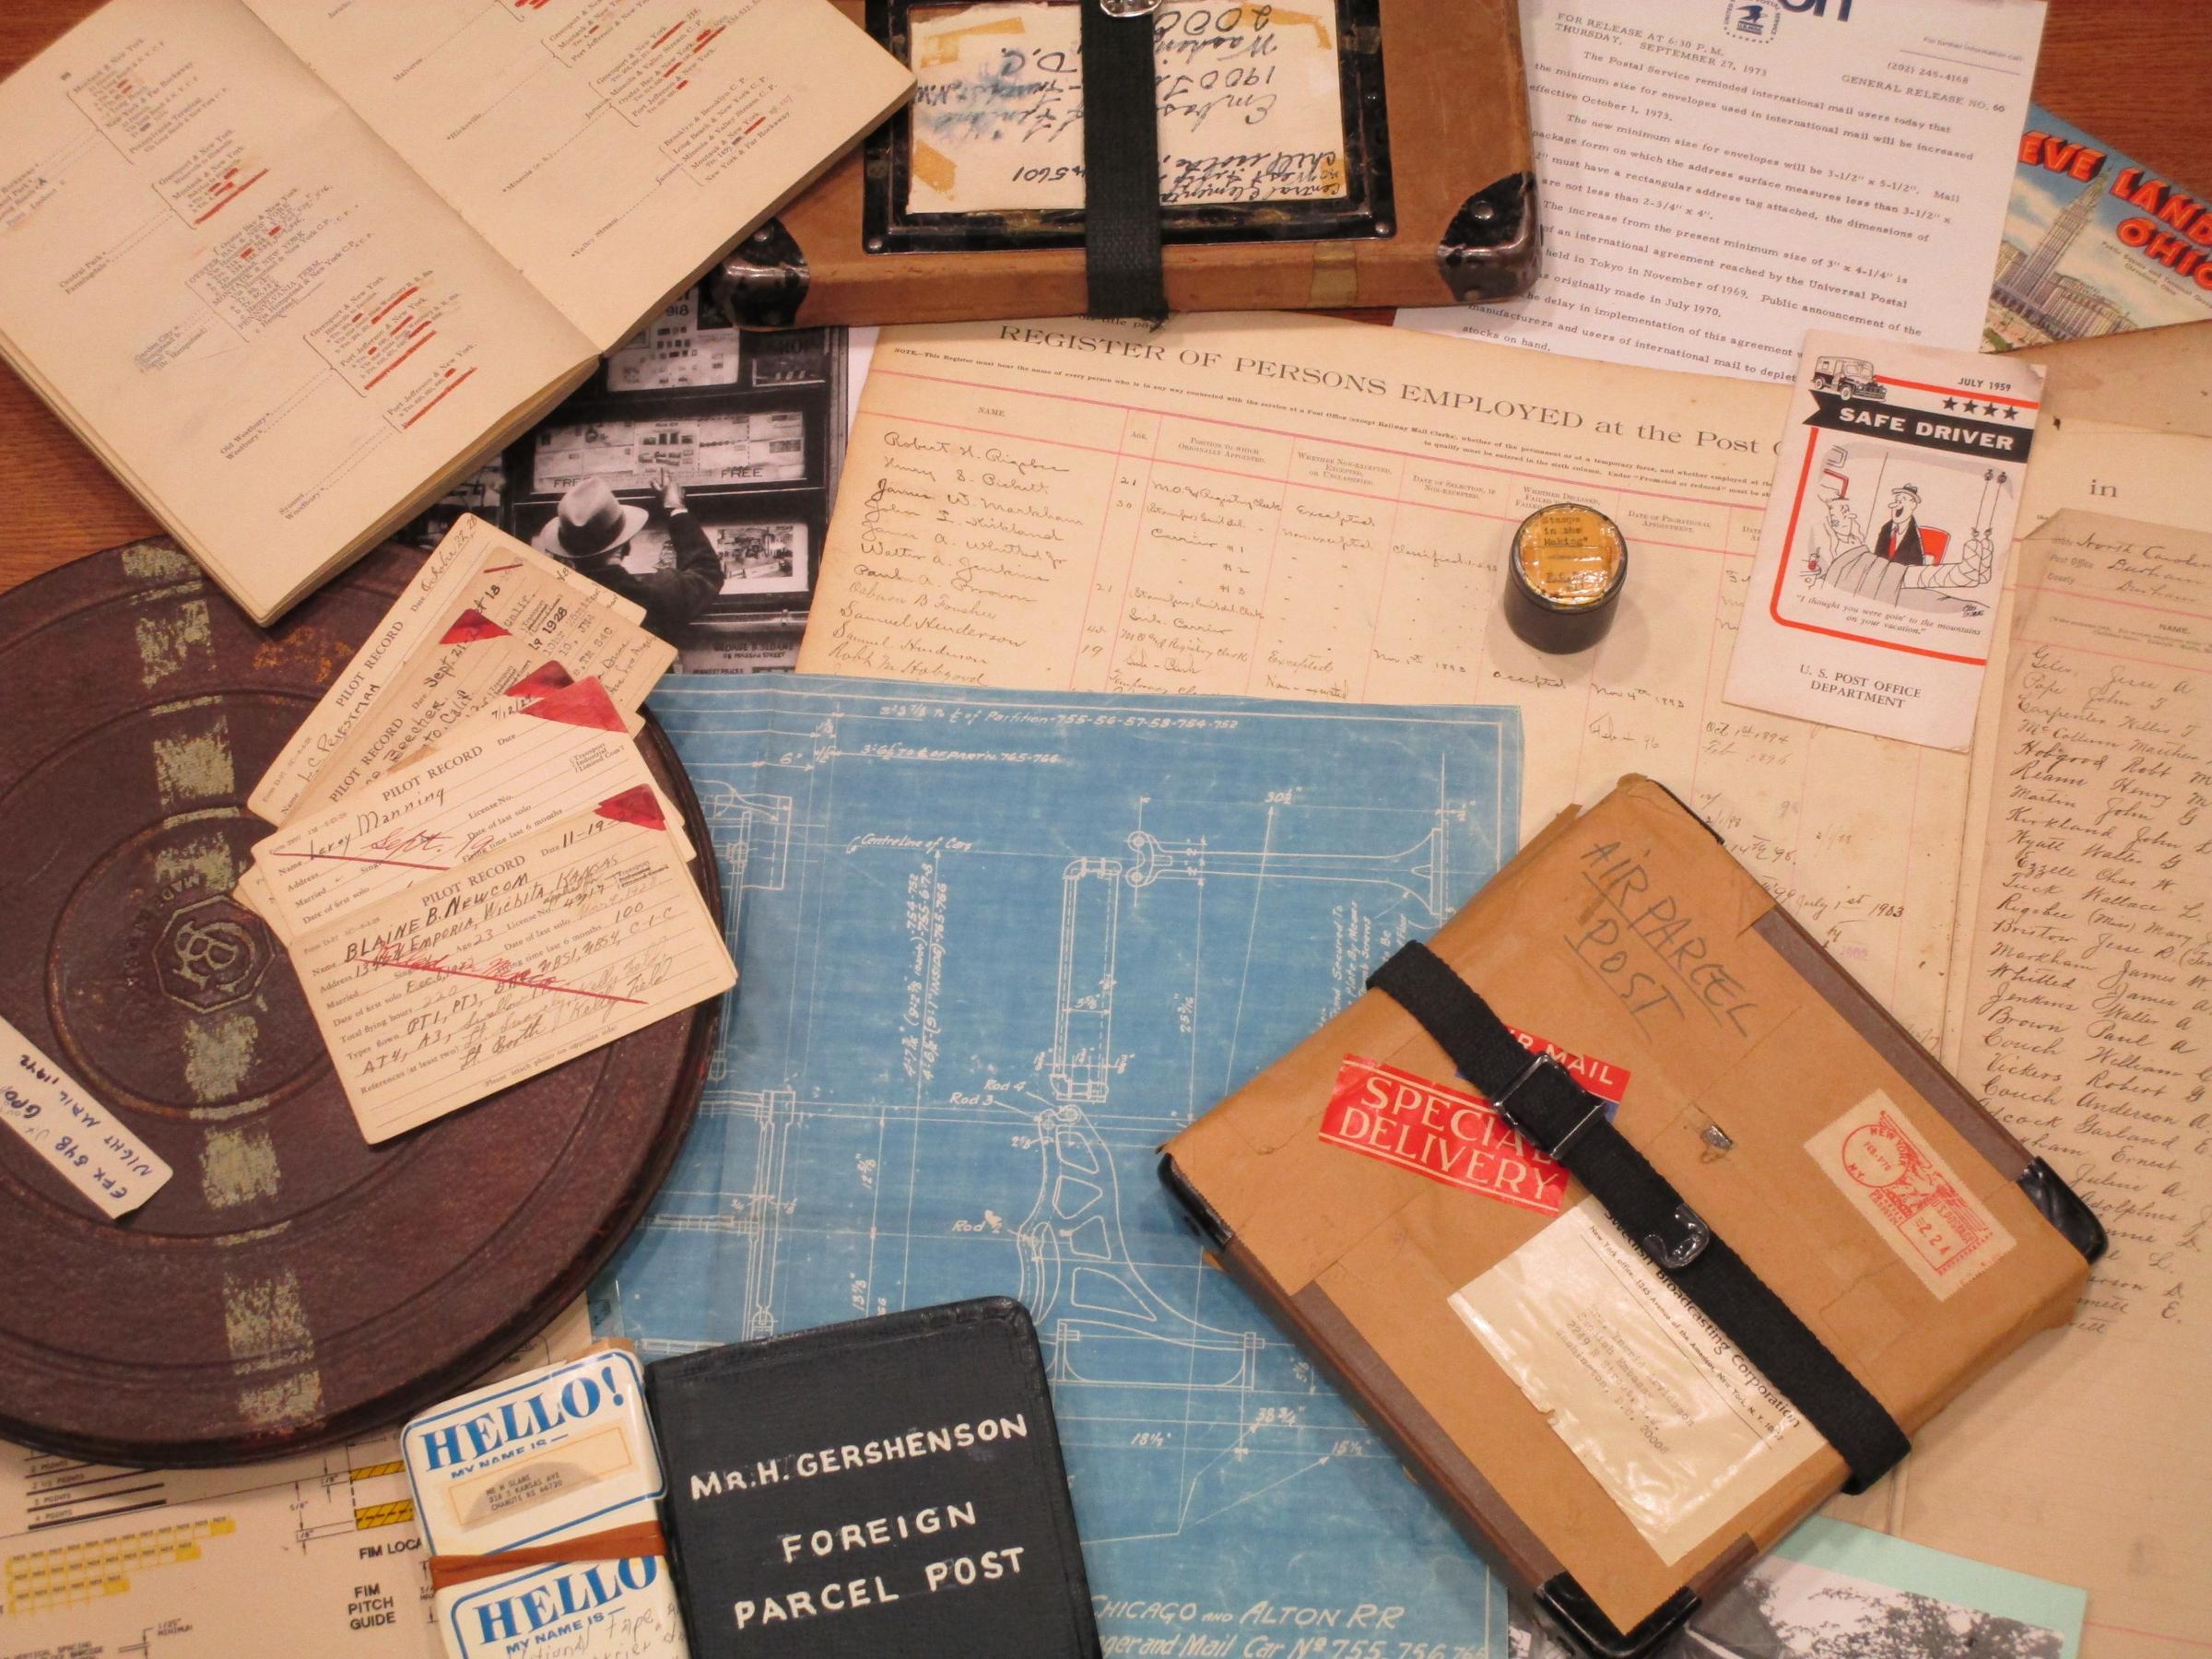 Photograph of various archival items such as registry of postal employees, nametags, brown paper parcel, notebooks, scrapbooks, photographs and other documents scattered across a desk